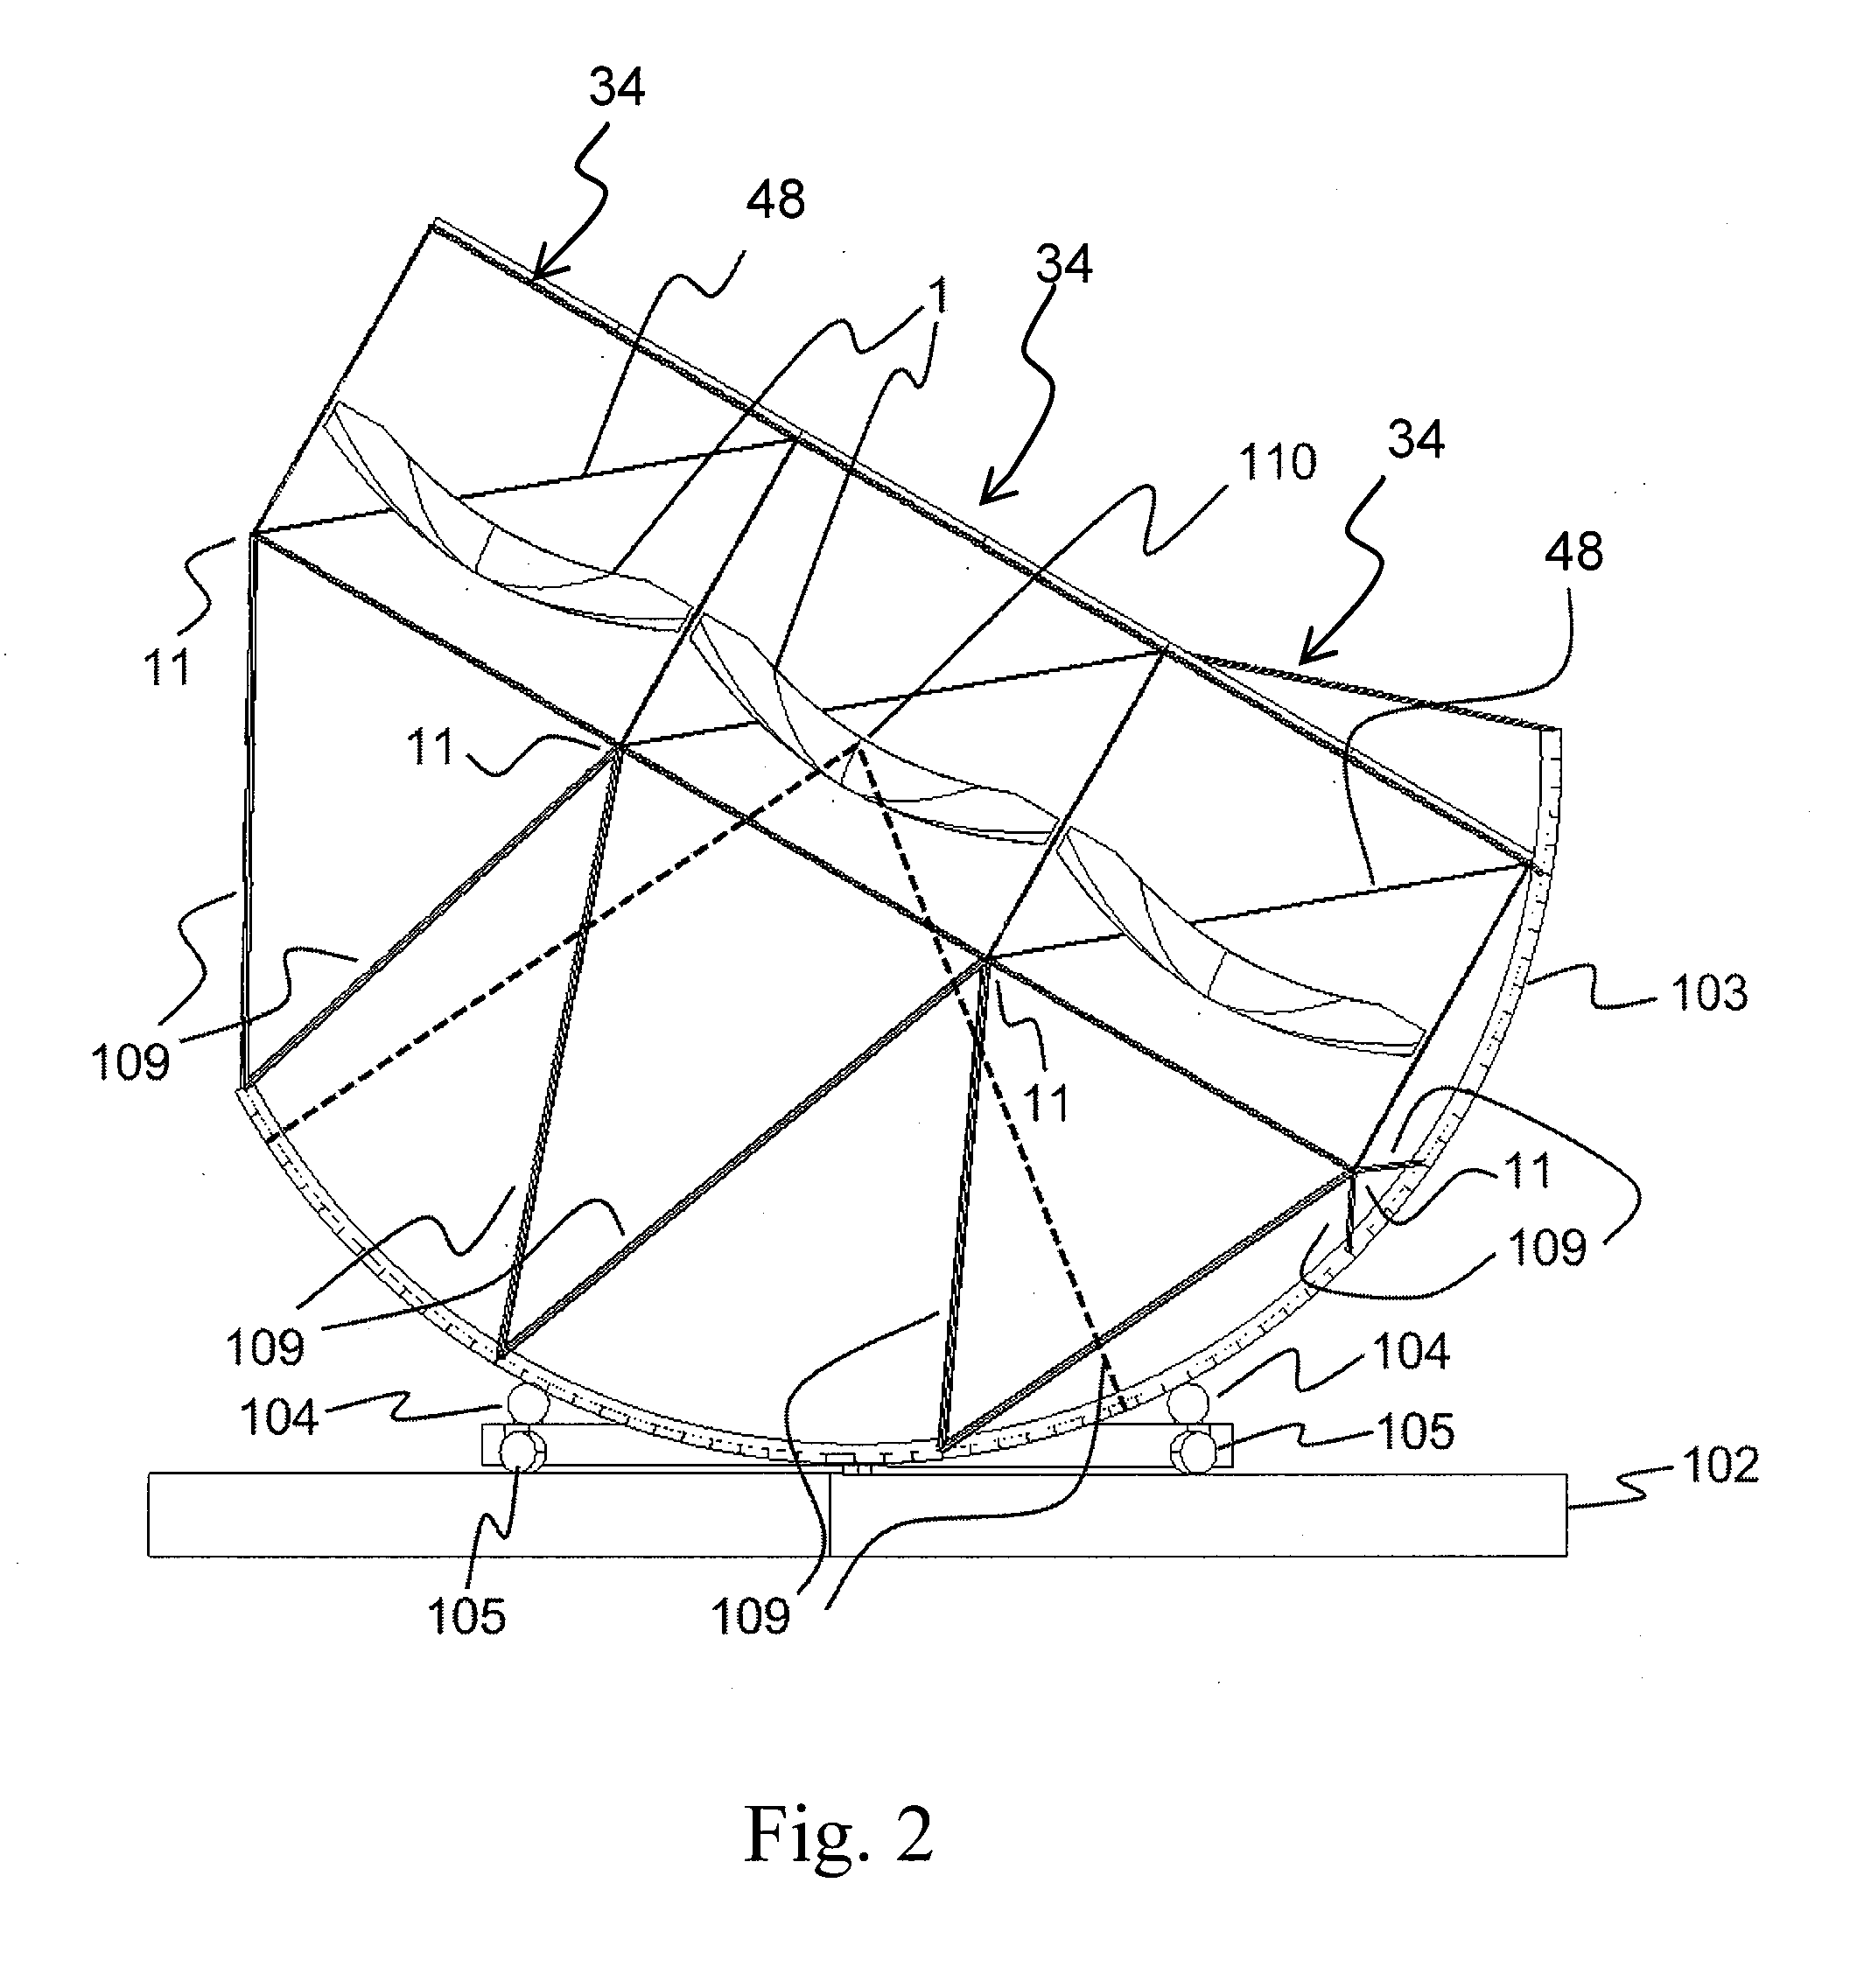 Solar concentrator apparatus with large, multiple, co-axial dish reflectors